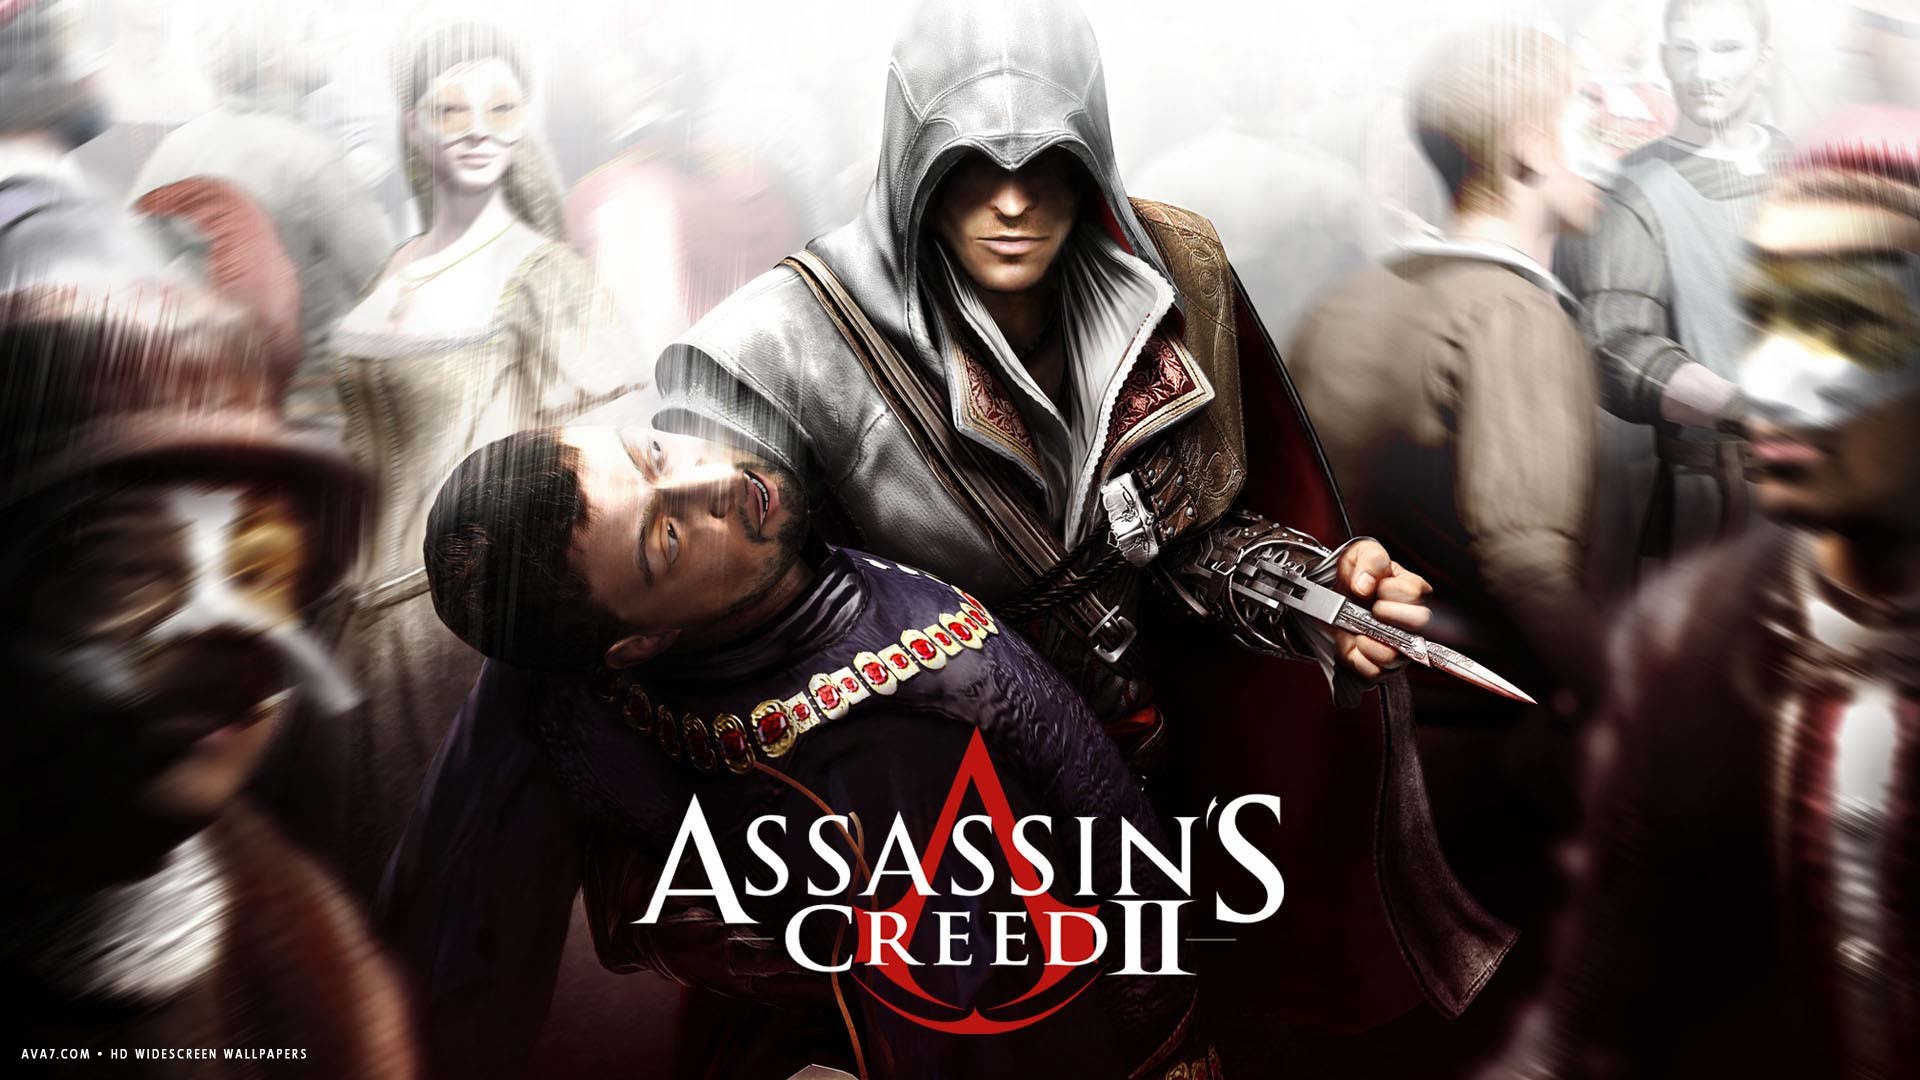 assassins creed 2 game epic historical action adventure stealth hd widescreen wallpaper